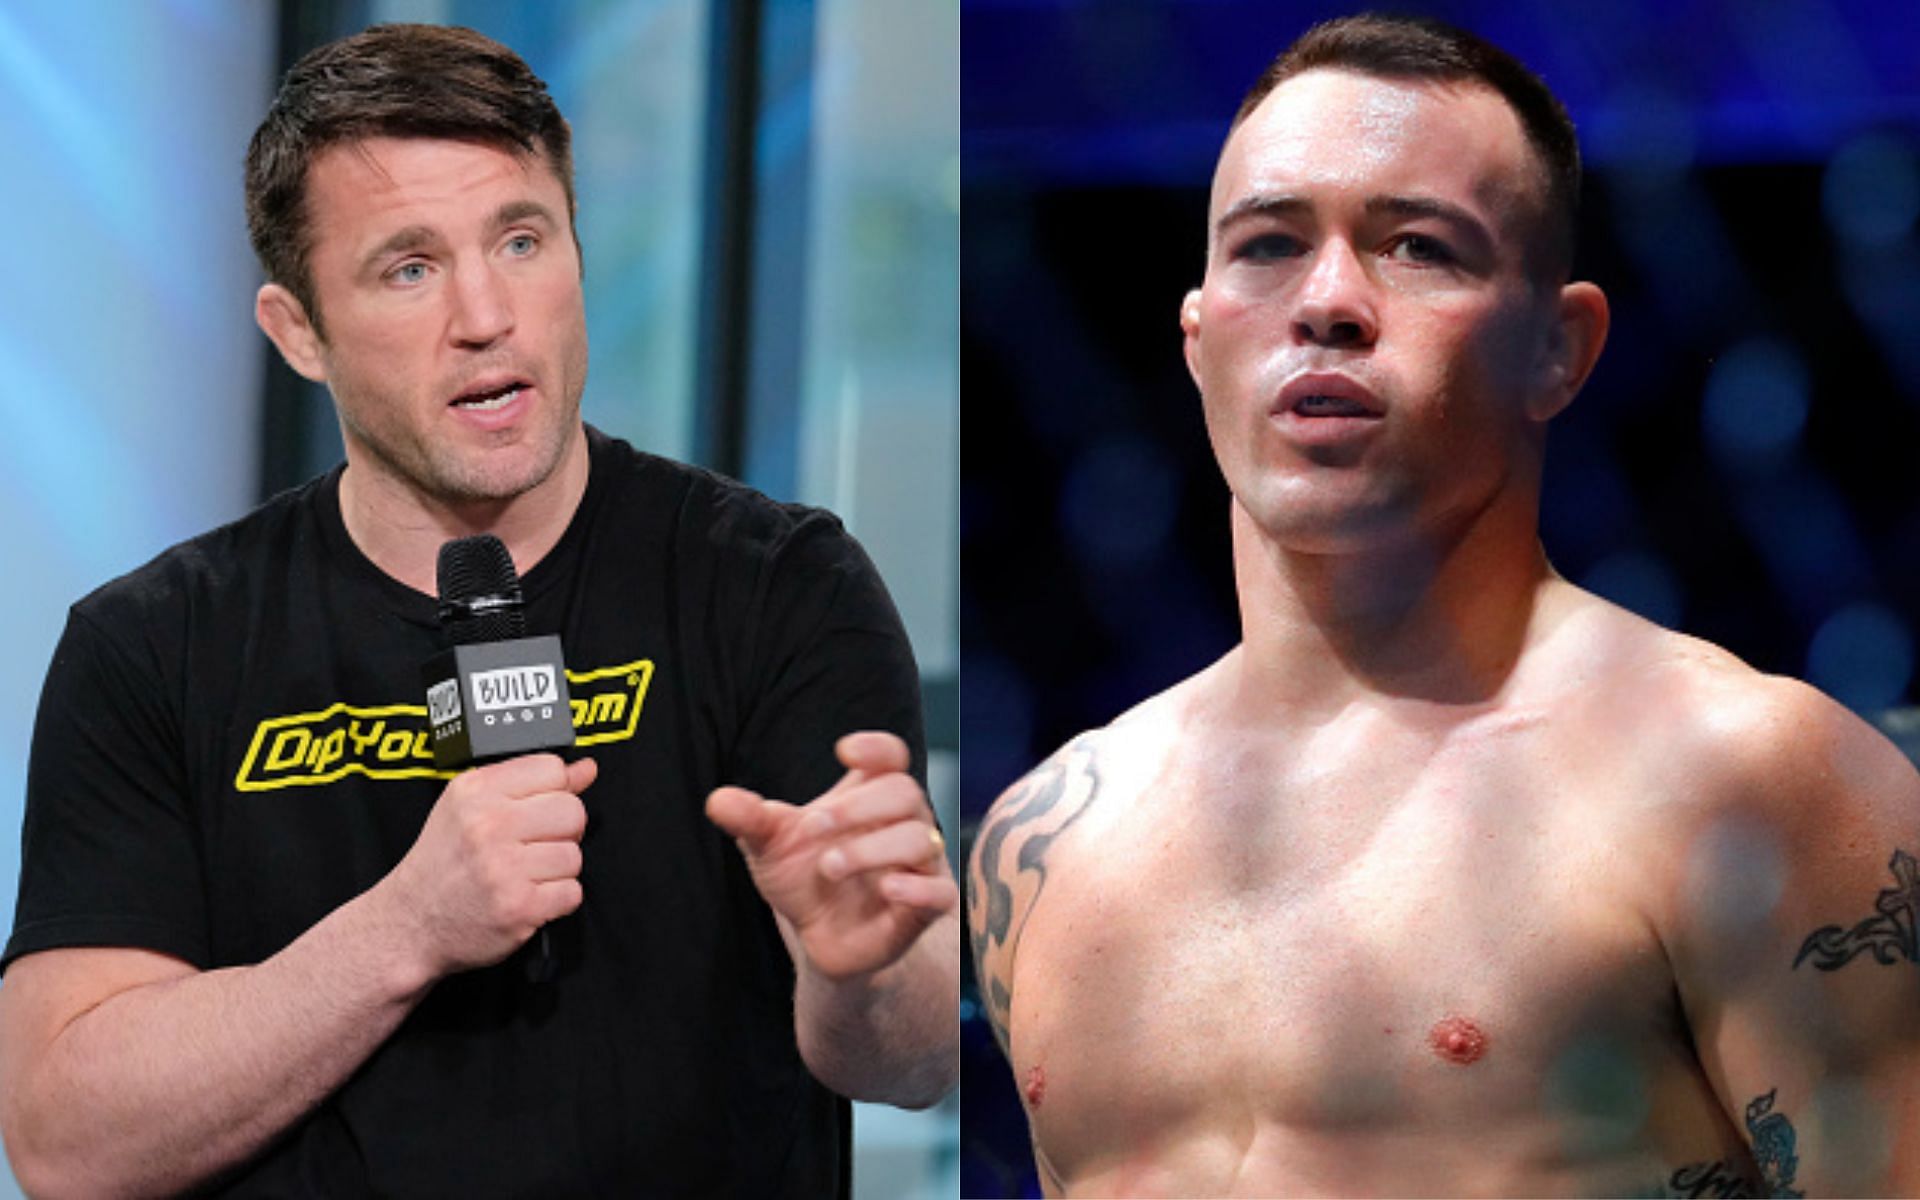 Chael Sonnen (left) and Colby Covington (right)(Images via Getty)